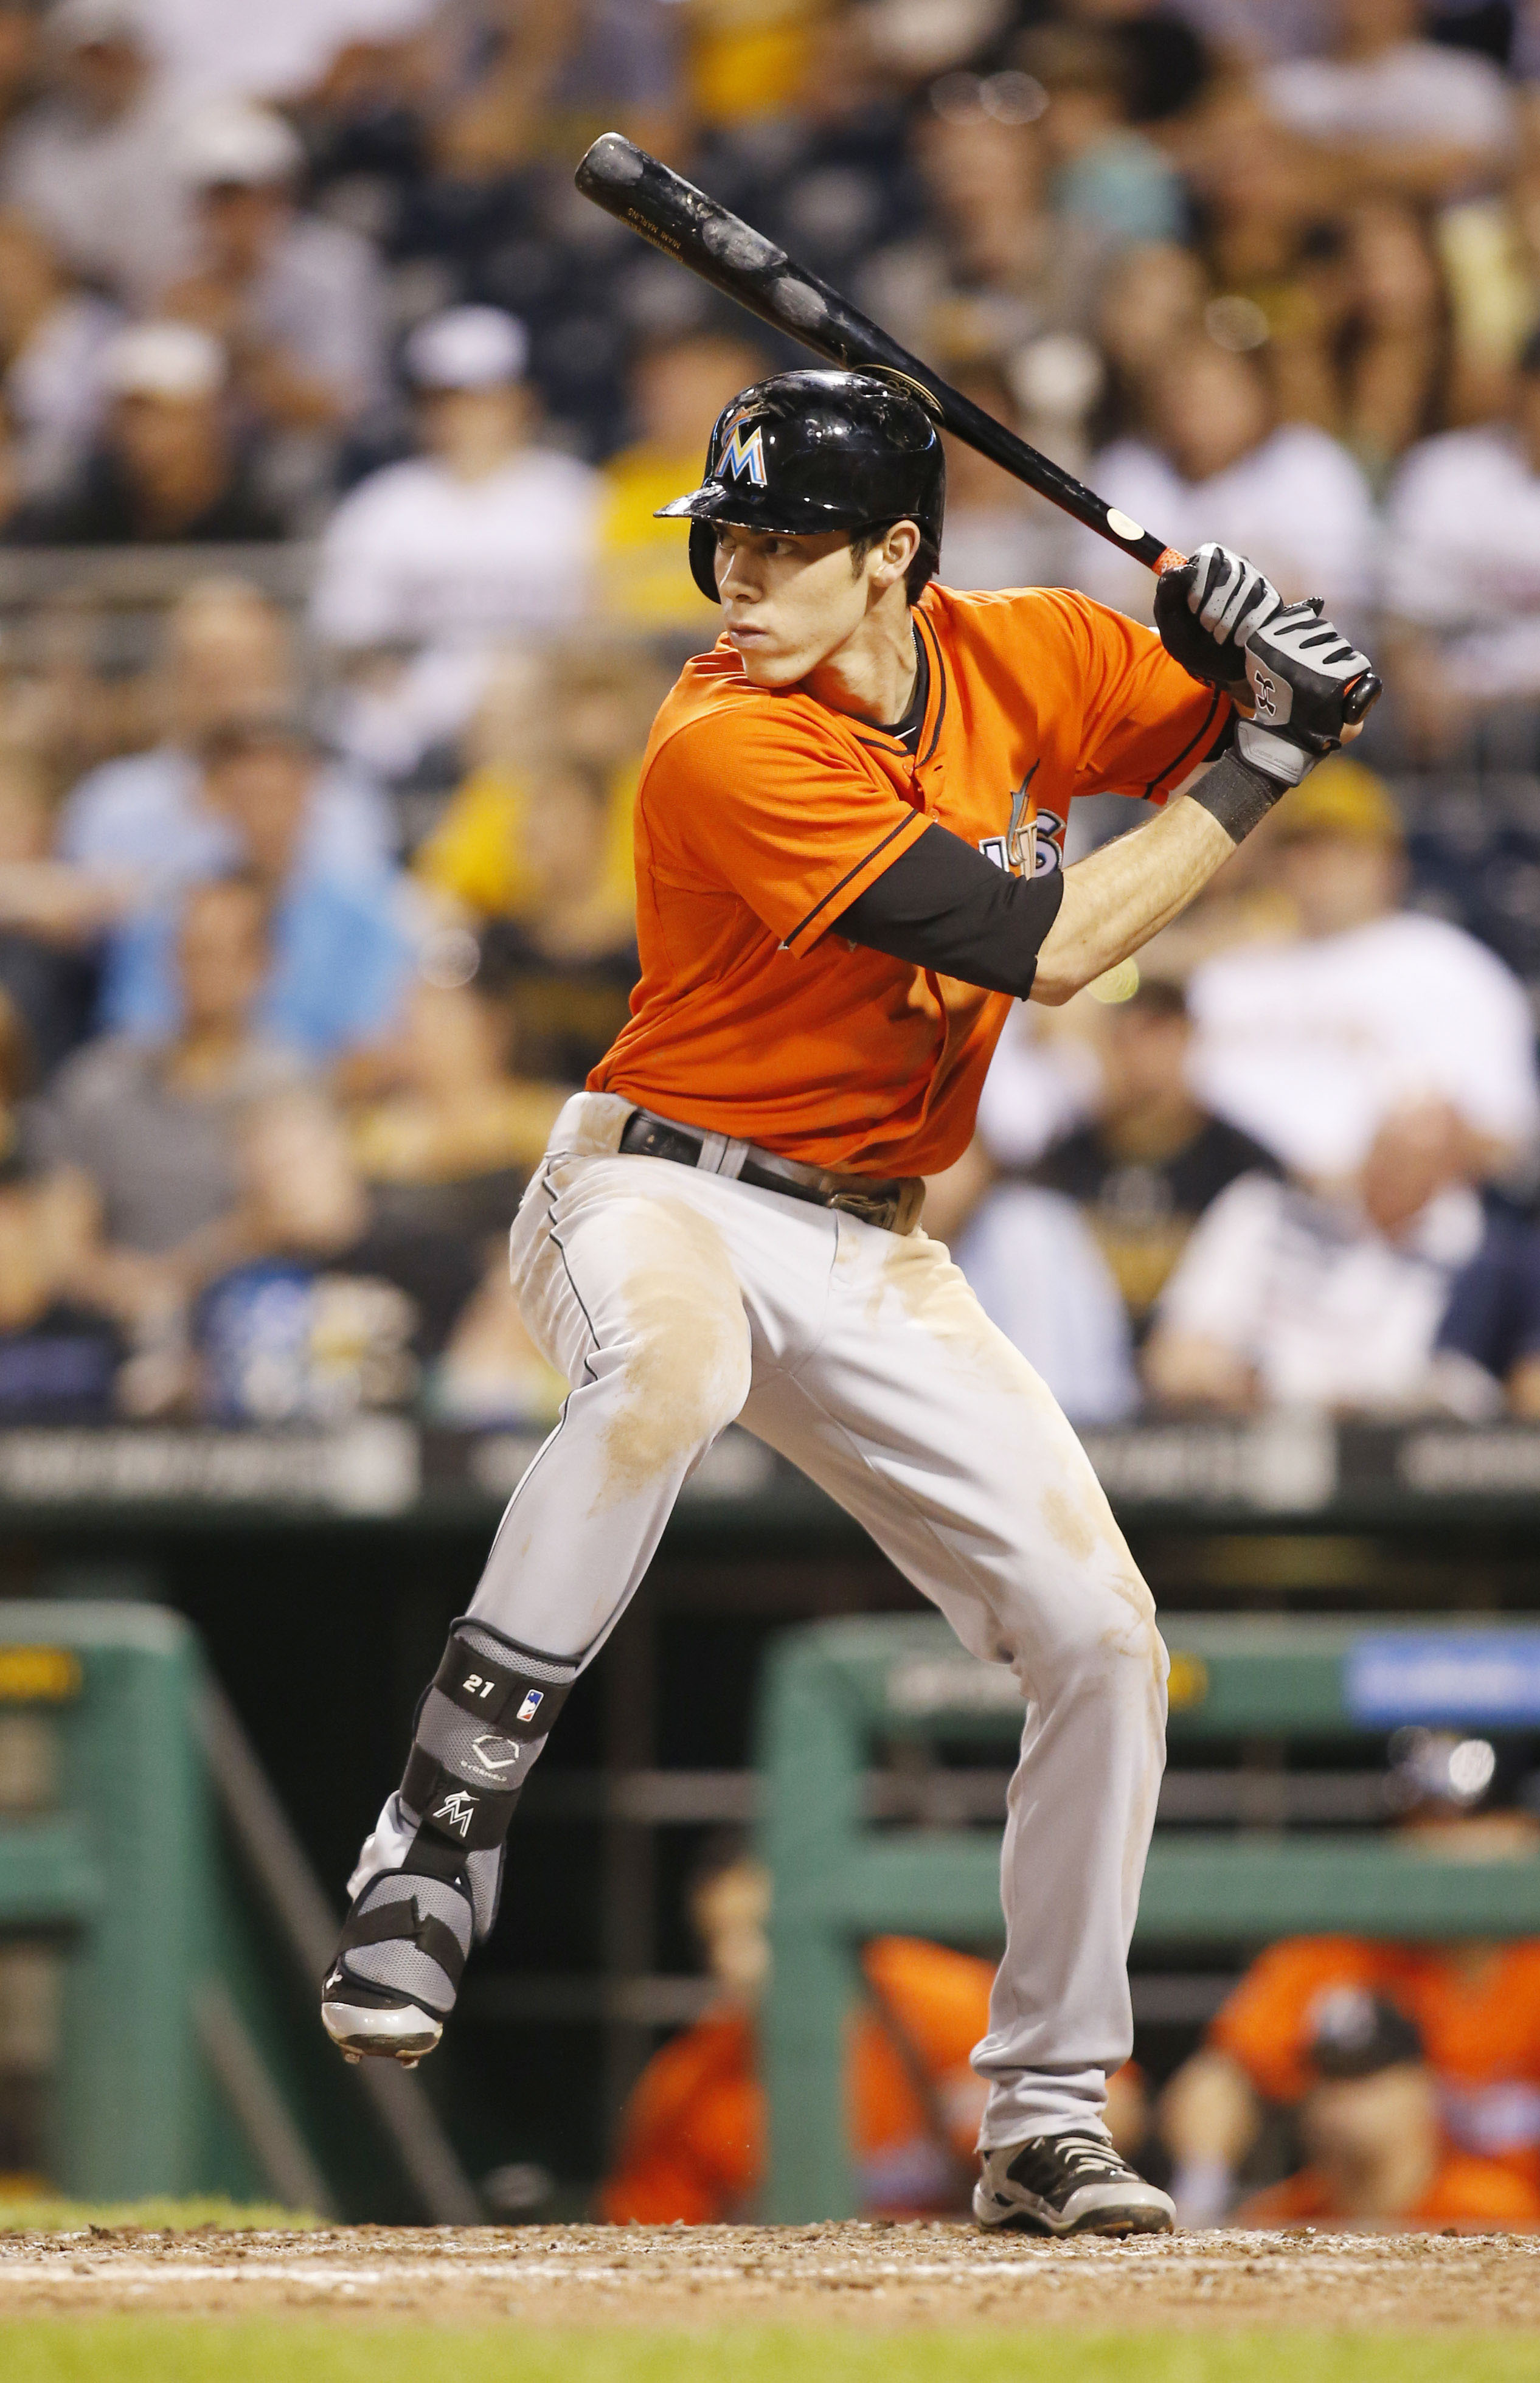 Report: Brewers made trade offer for Marlins' Yelich